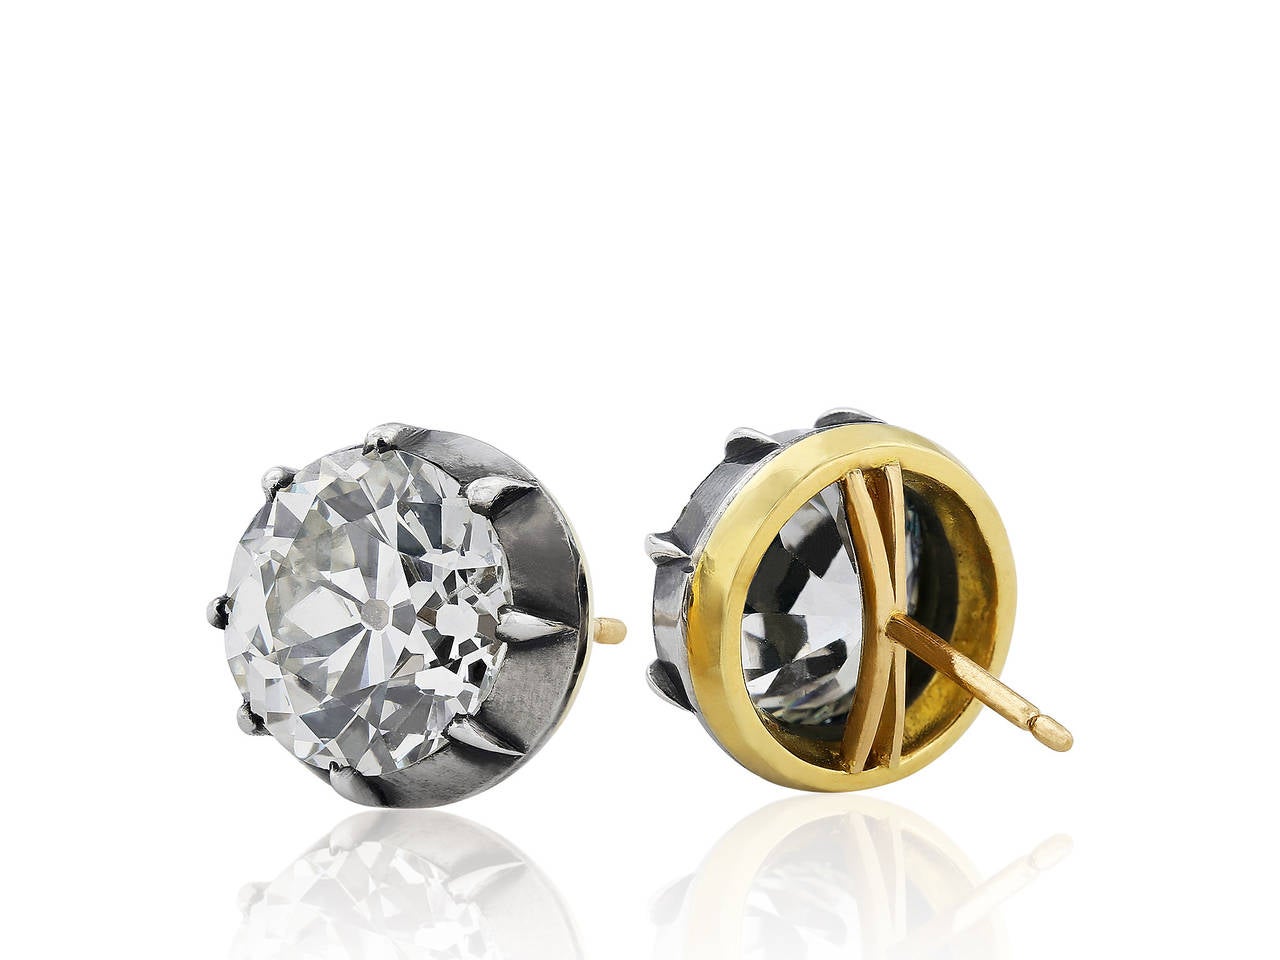 Sterling silver on 14 karat yellow gold vintage style stud earrings consisting of 2 Old European cut diamonds having a total weight of 8.18 carats, one diamond weighing 4.02 carats, the second weighing 4.16 carats.